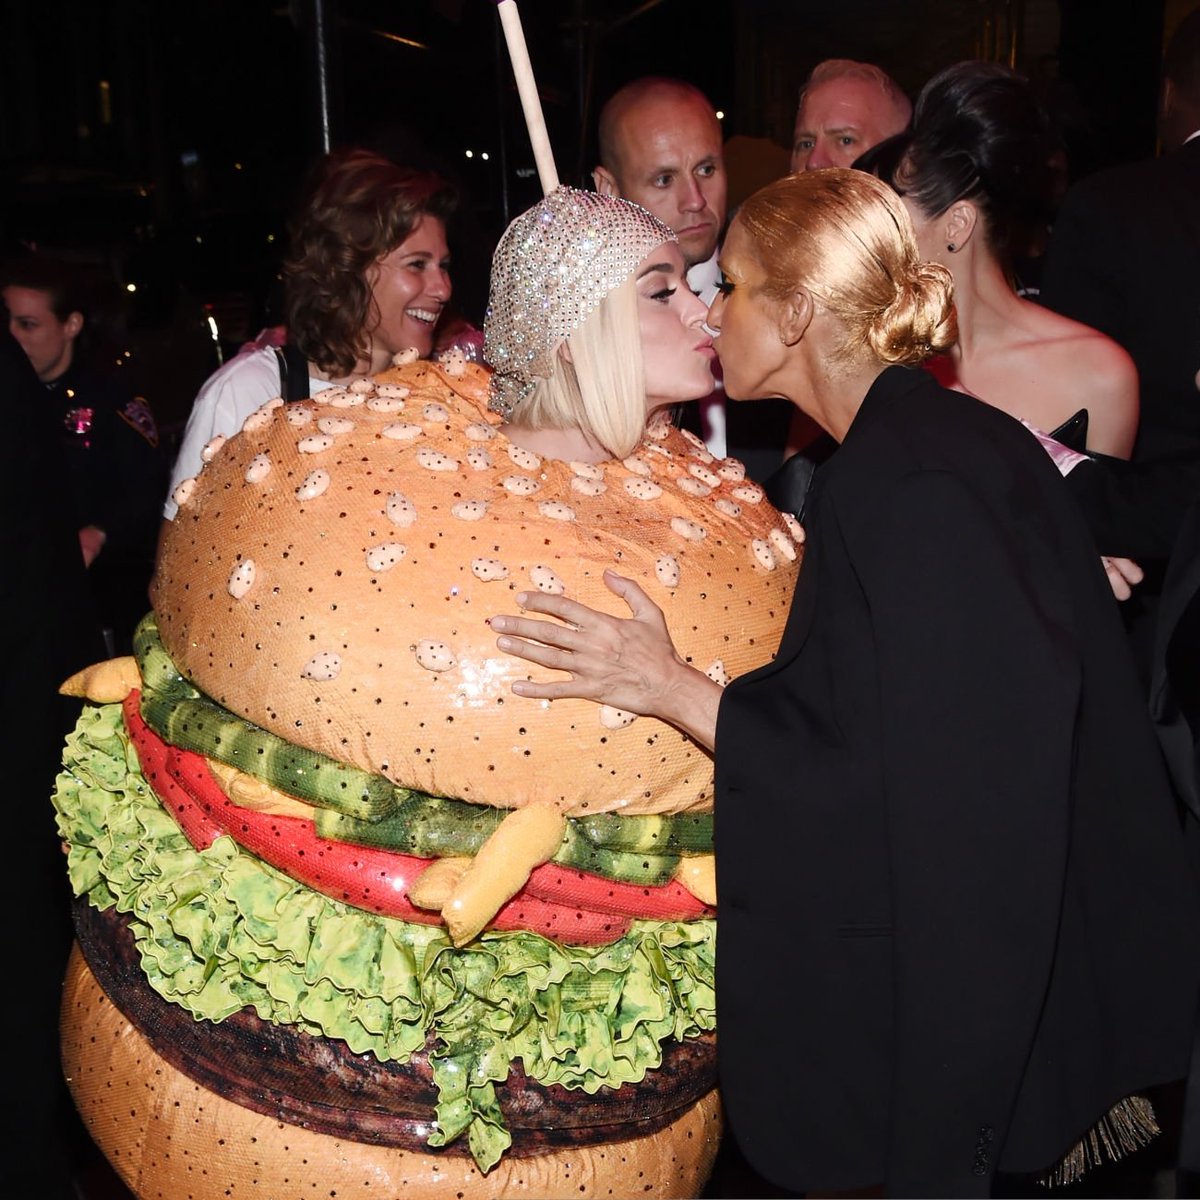 I kissed a burger and I liked it ????????
#MetGala #AfterParty

????: Daniel Zuchnik / Getty Images https://t.co/yA1jyoGXh2